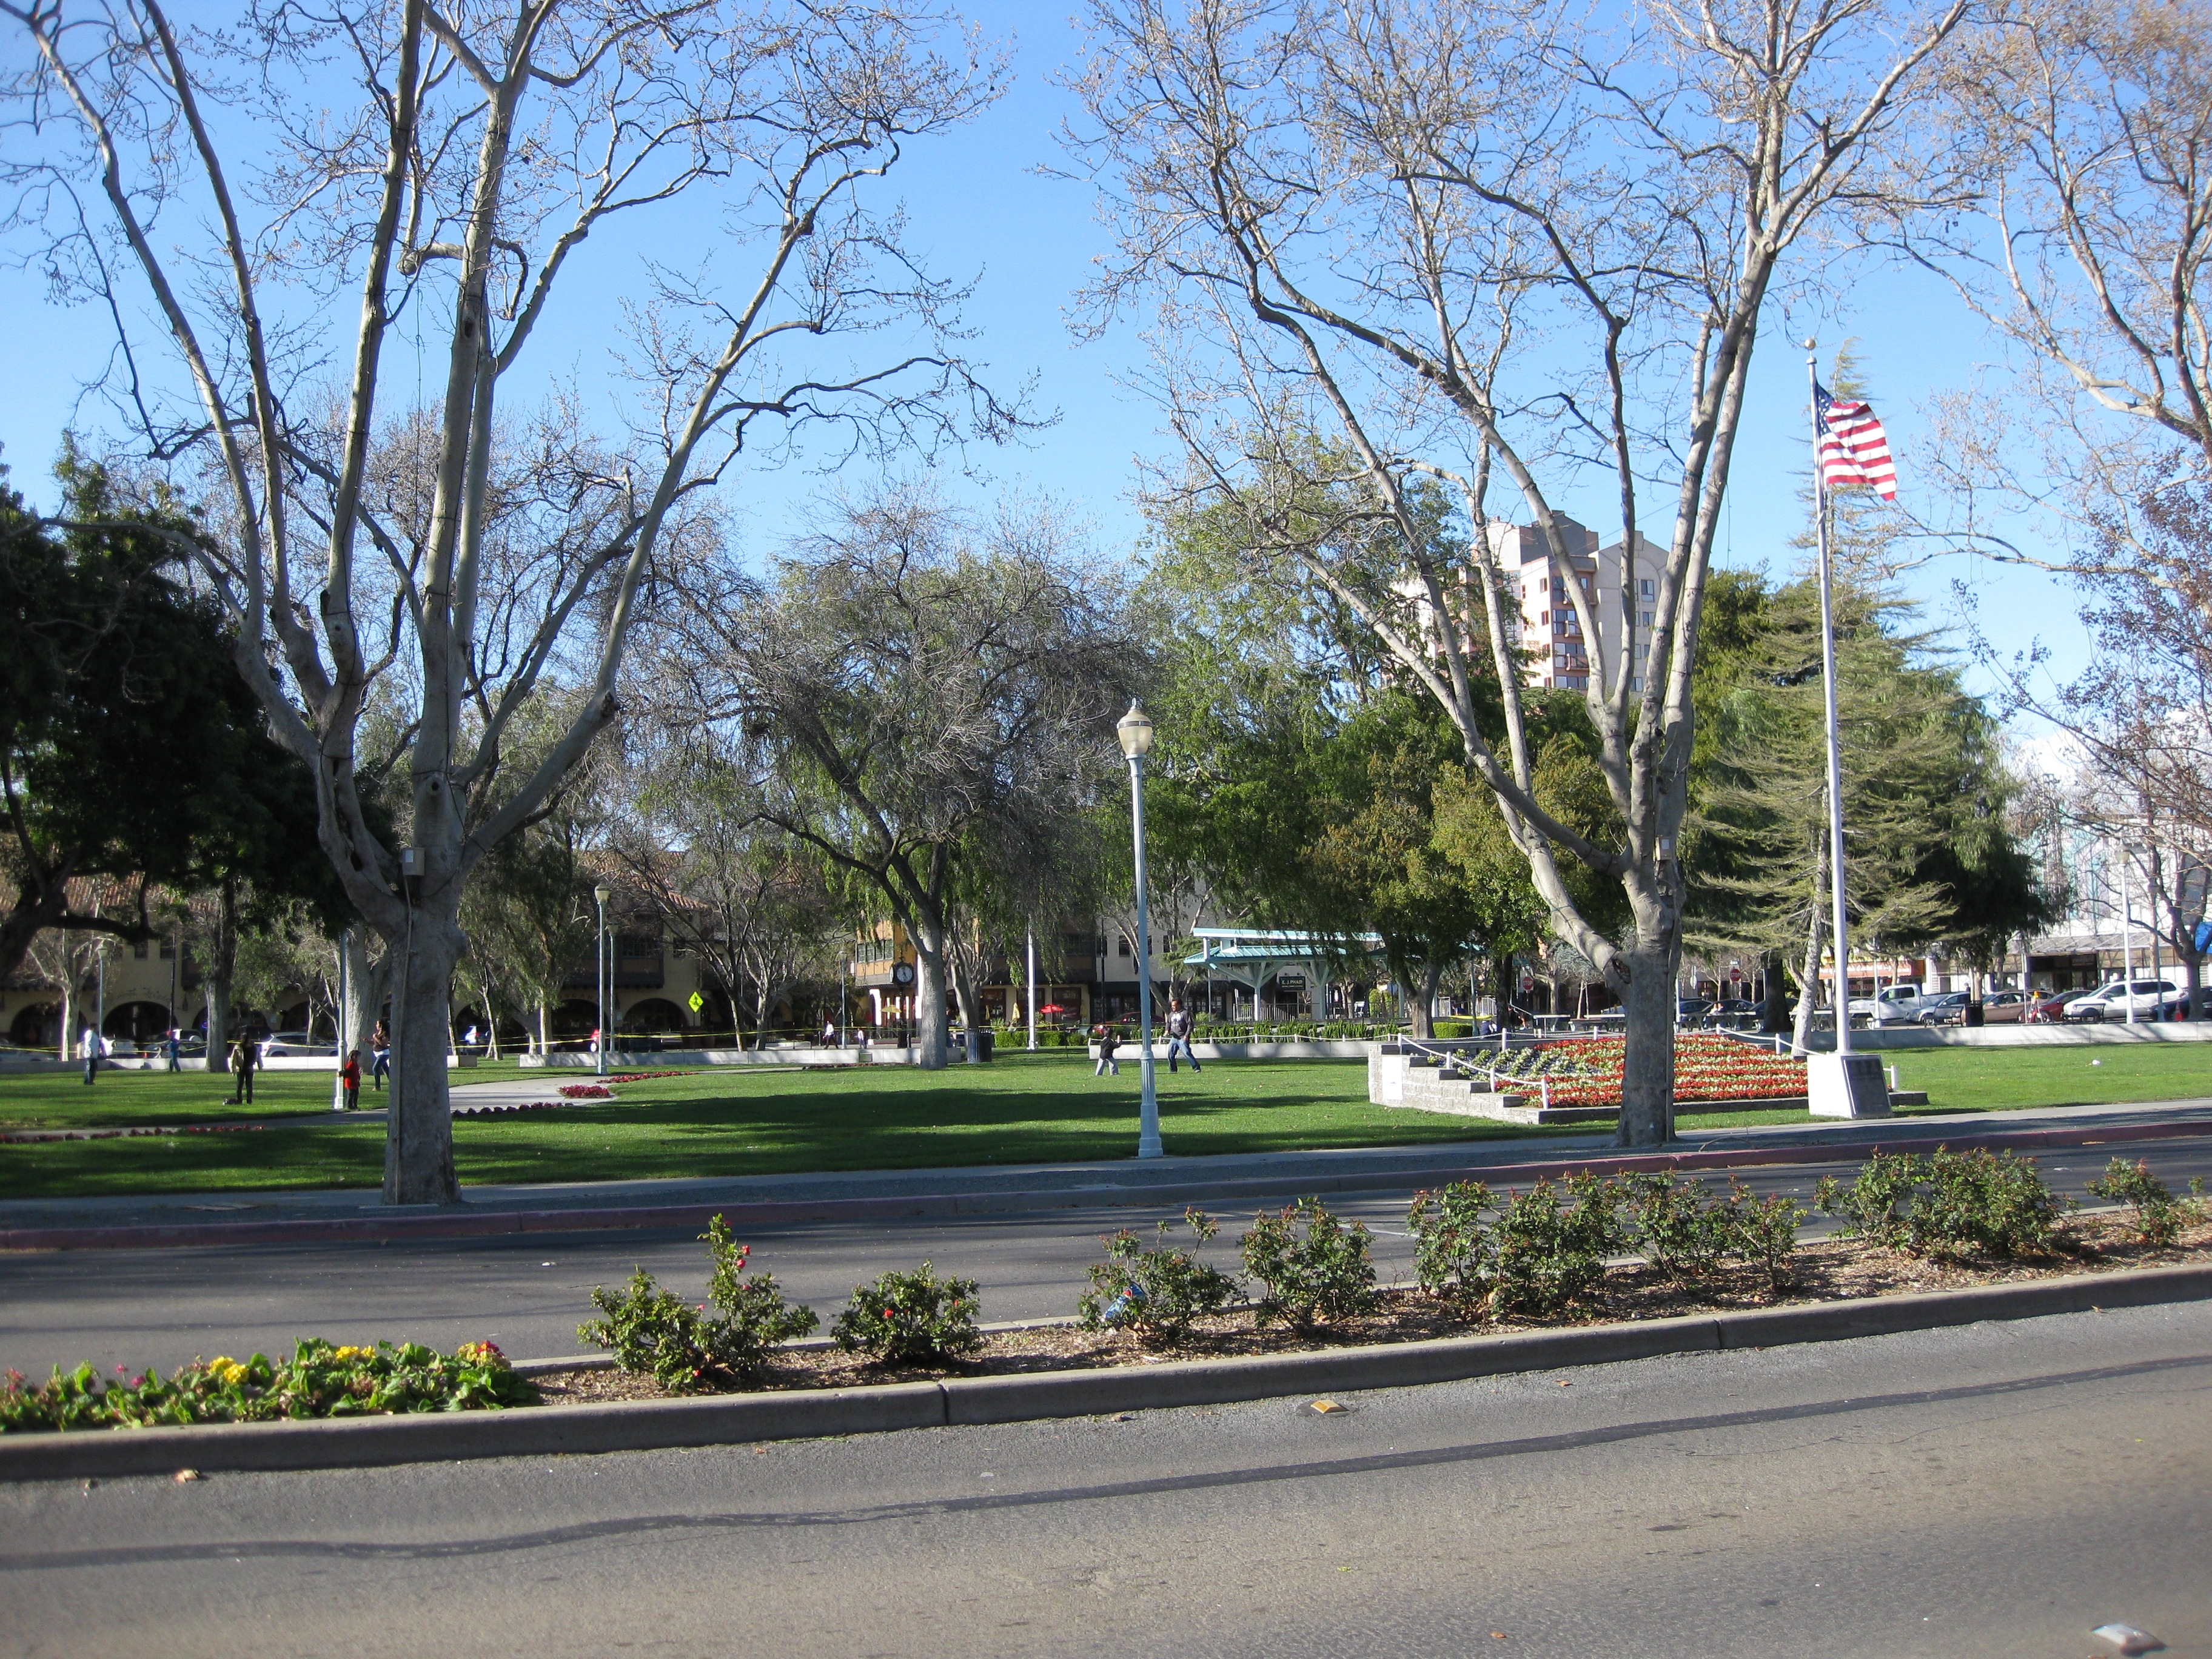 View of Todos Santos Plaza (Marker visible on base of the flagpole)